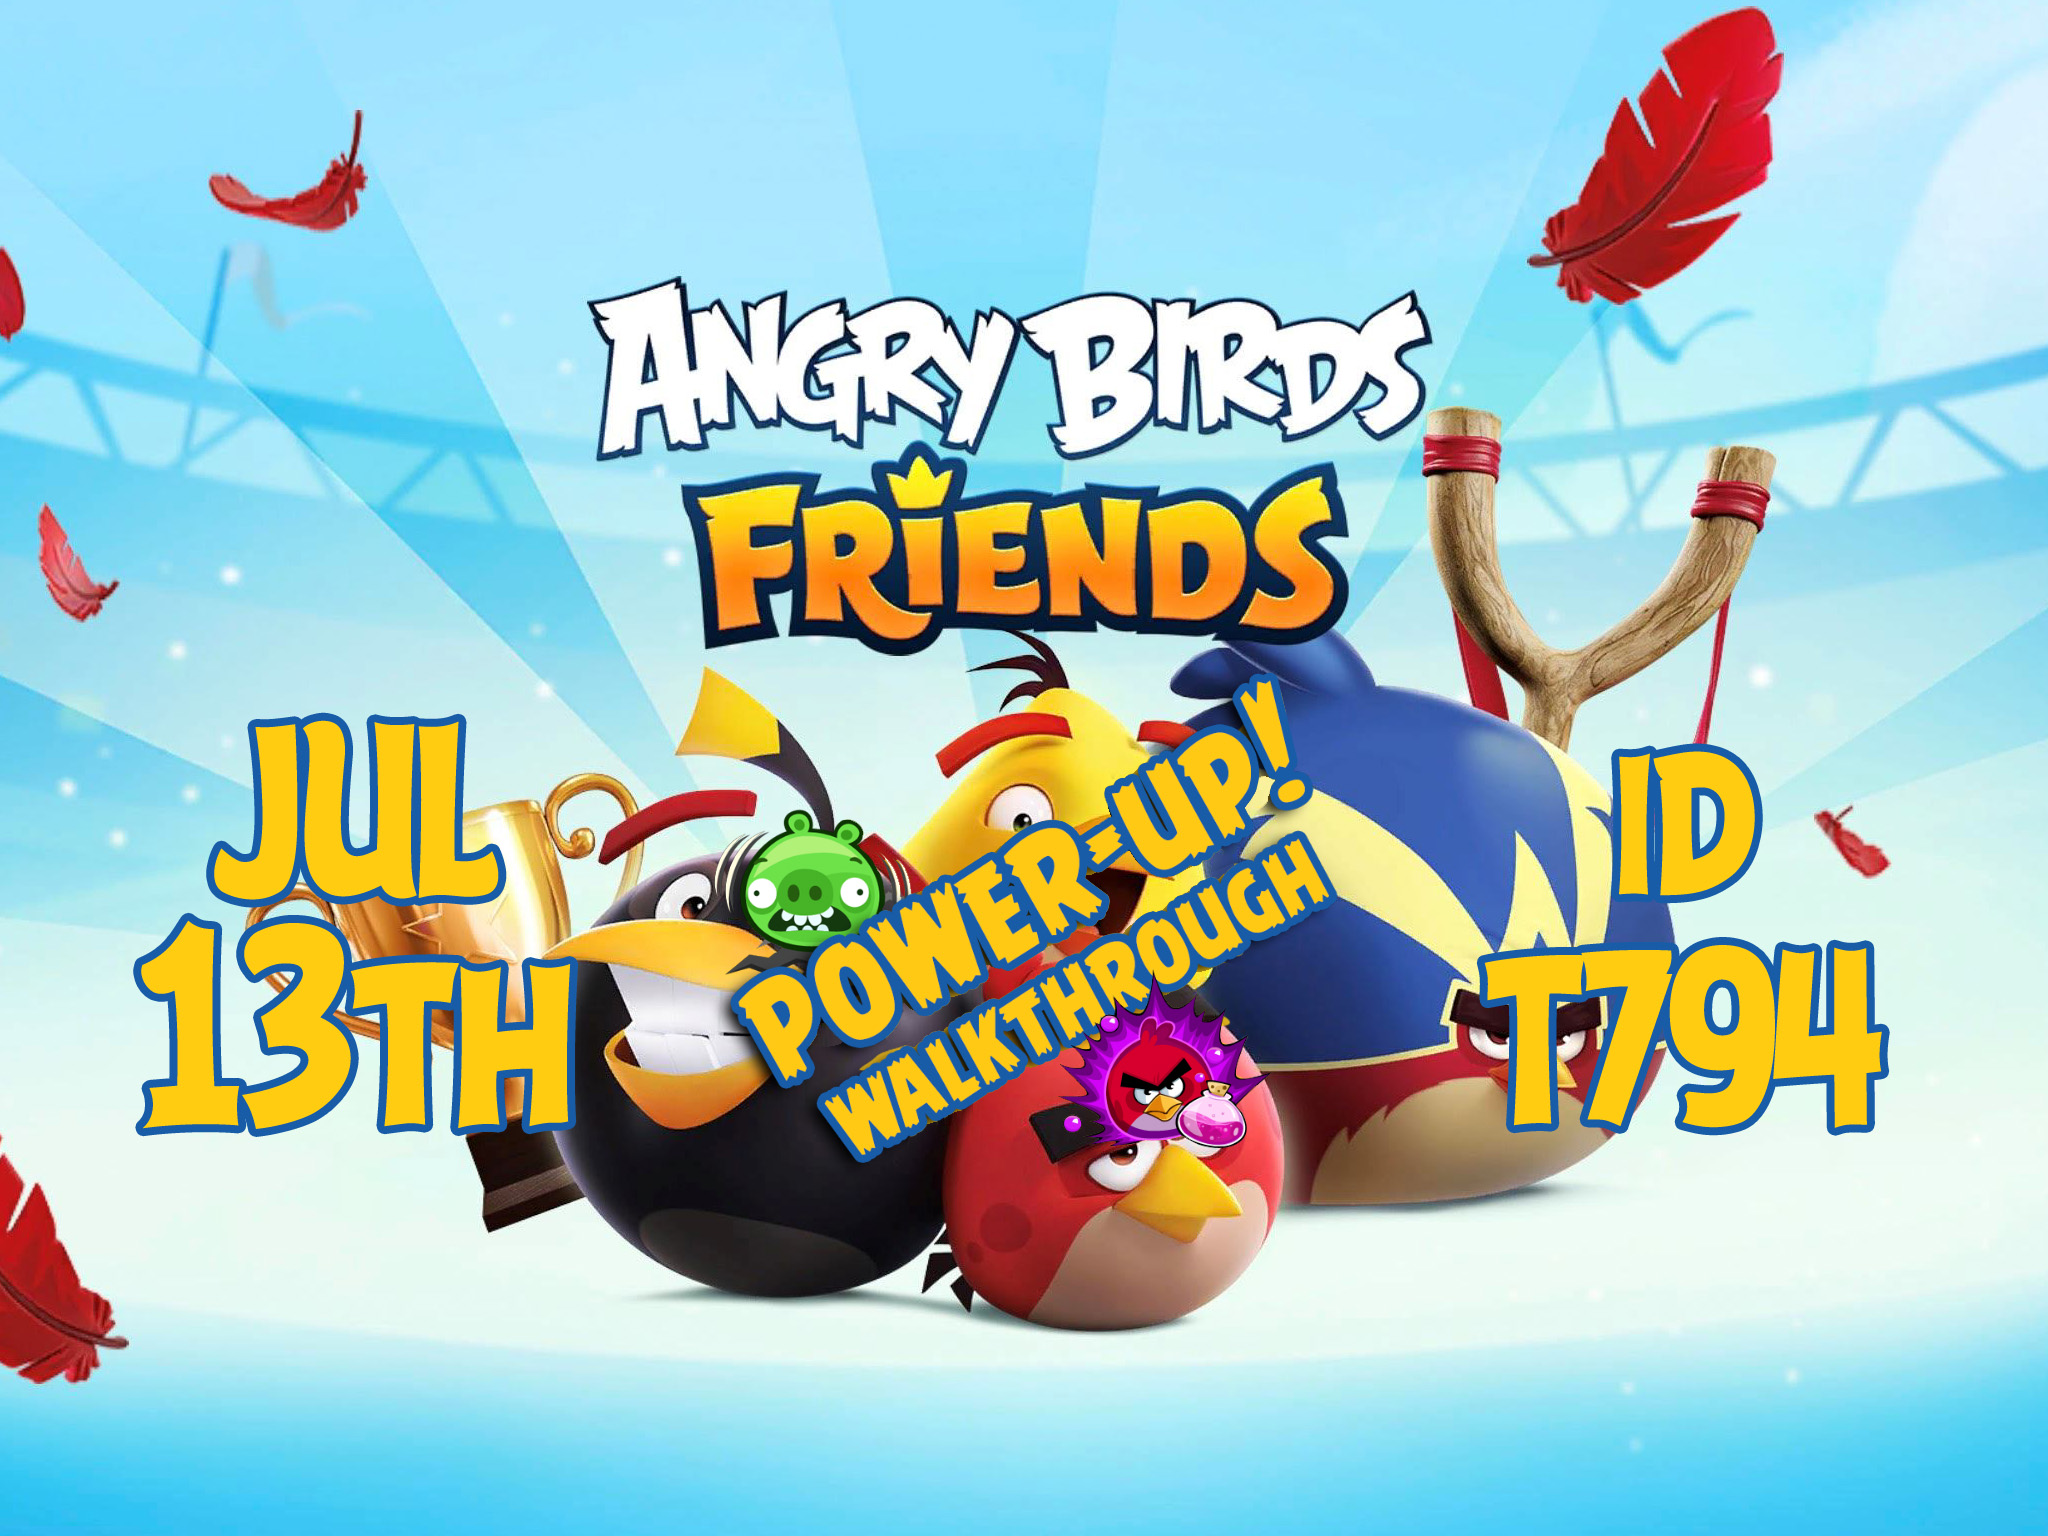 Angry-Birds-Friends-Tournament-T794-Feature-Image-PU